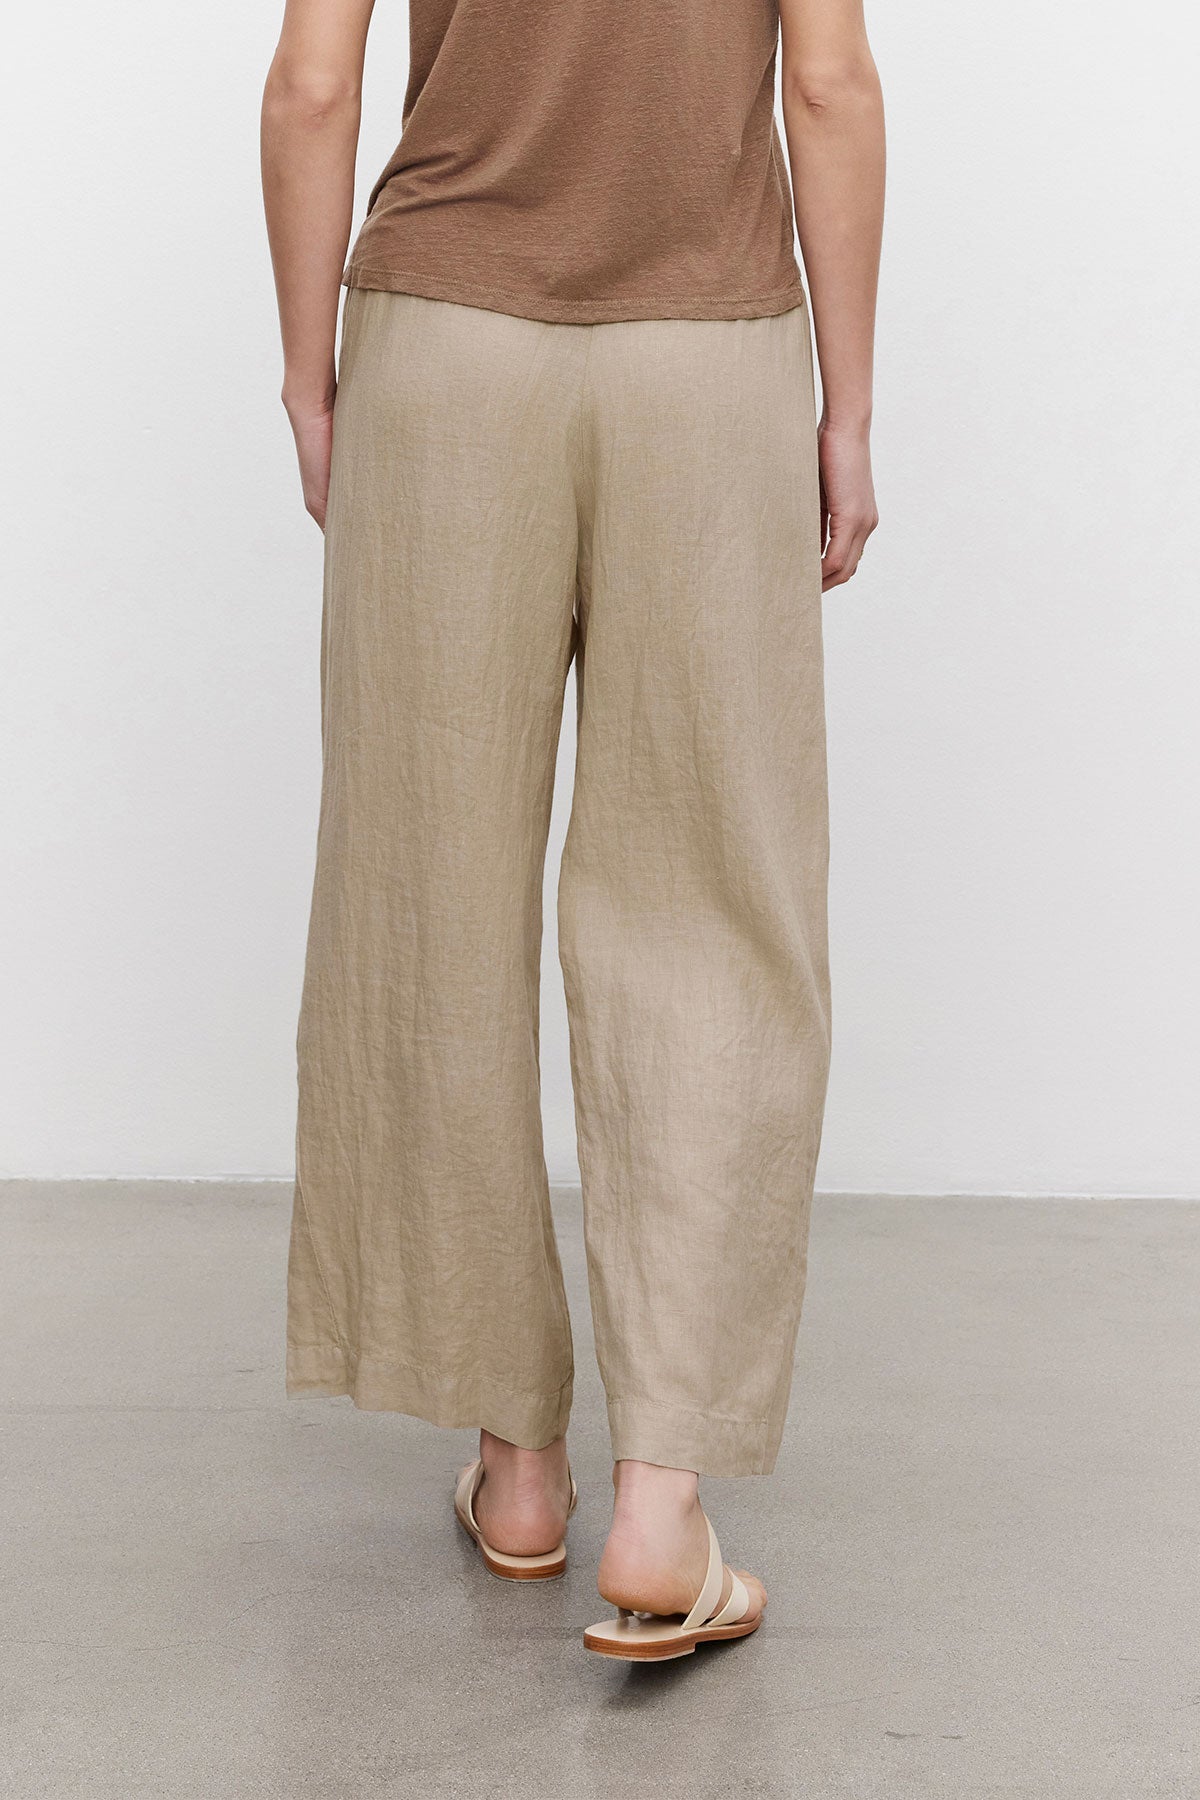 Rear view of a person wearing Velvet by Graham & Spencer LOLA LINEN PANTS and tan sandals, standing in a room with a white background.-36220935241921